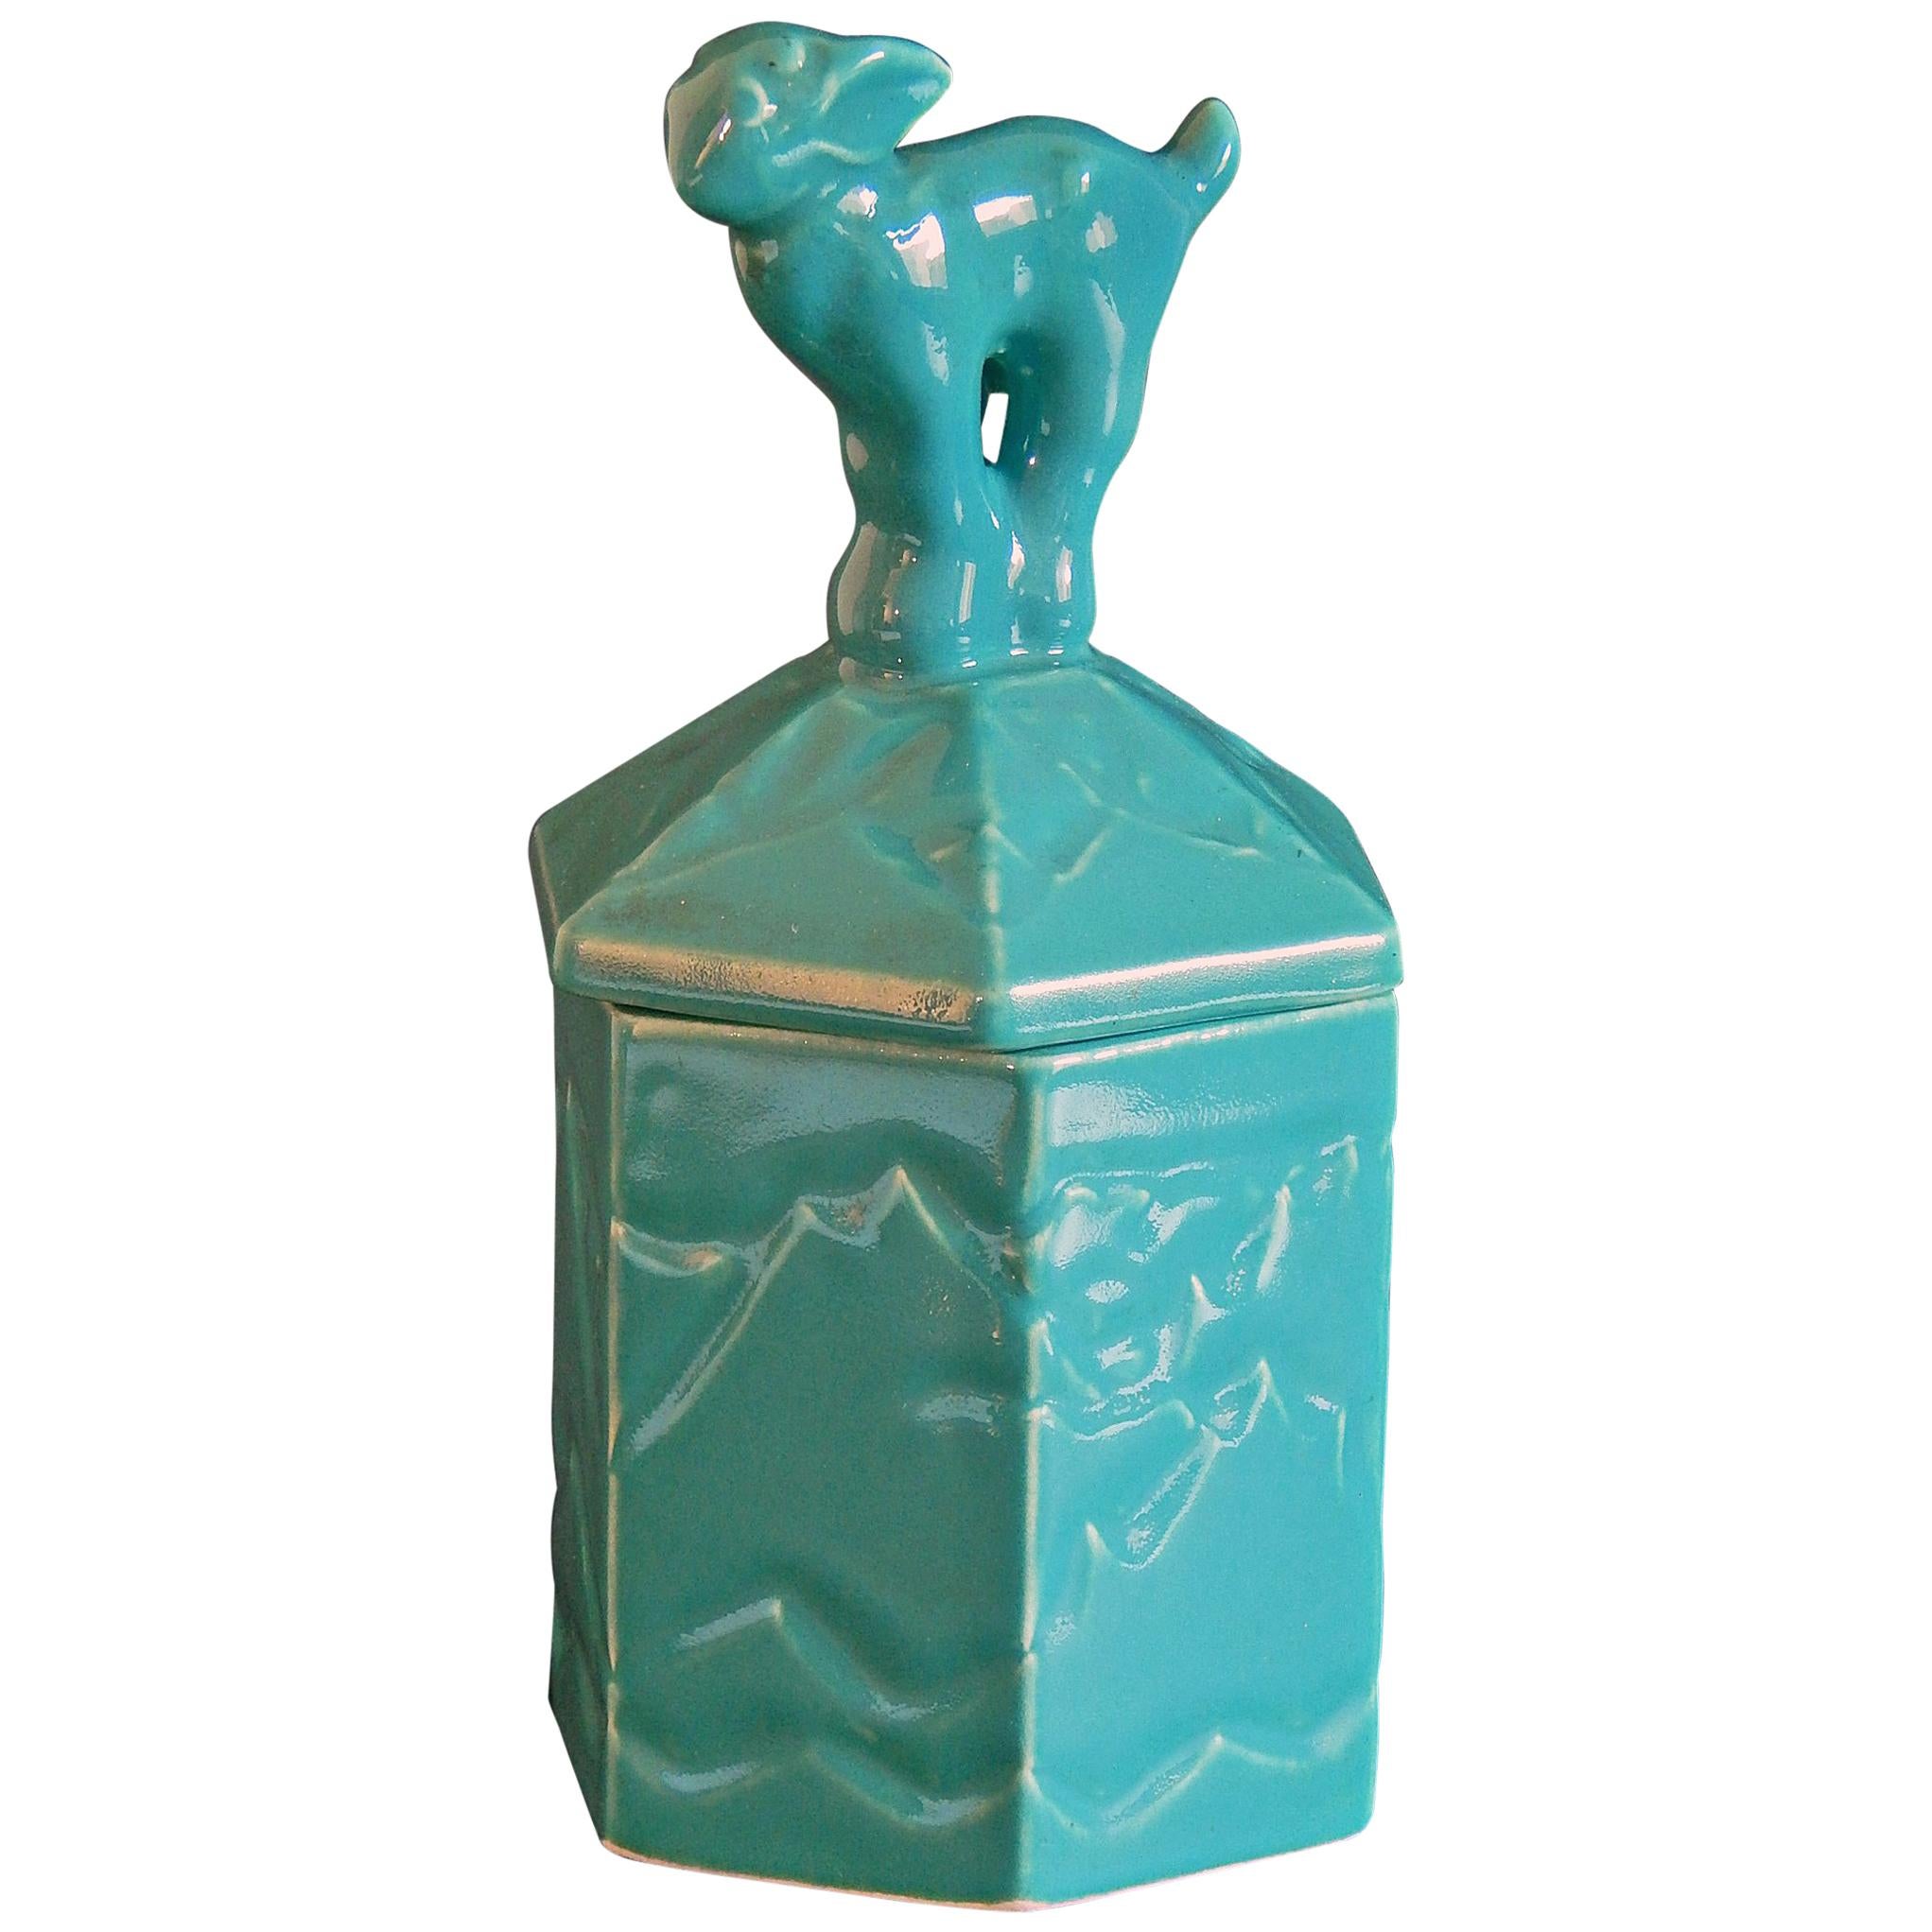 "Mountain Goat Humidor, " Art Deco Lidded Container with Teal-Turquoise Glaze